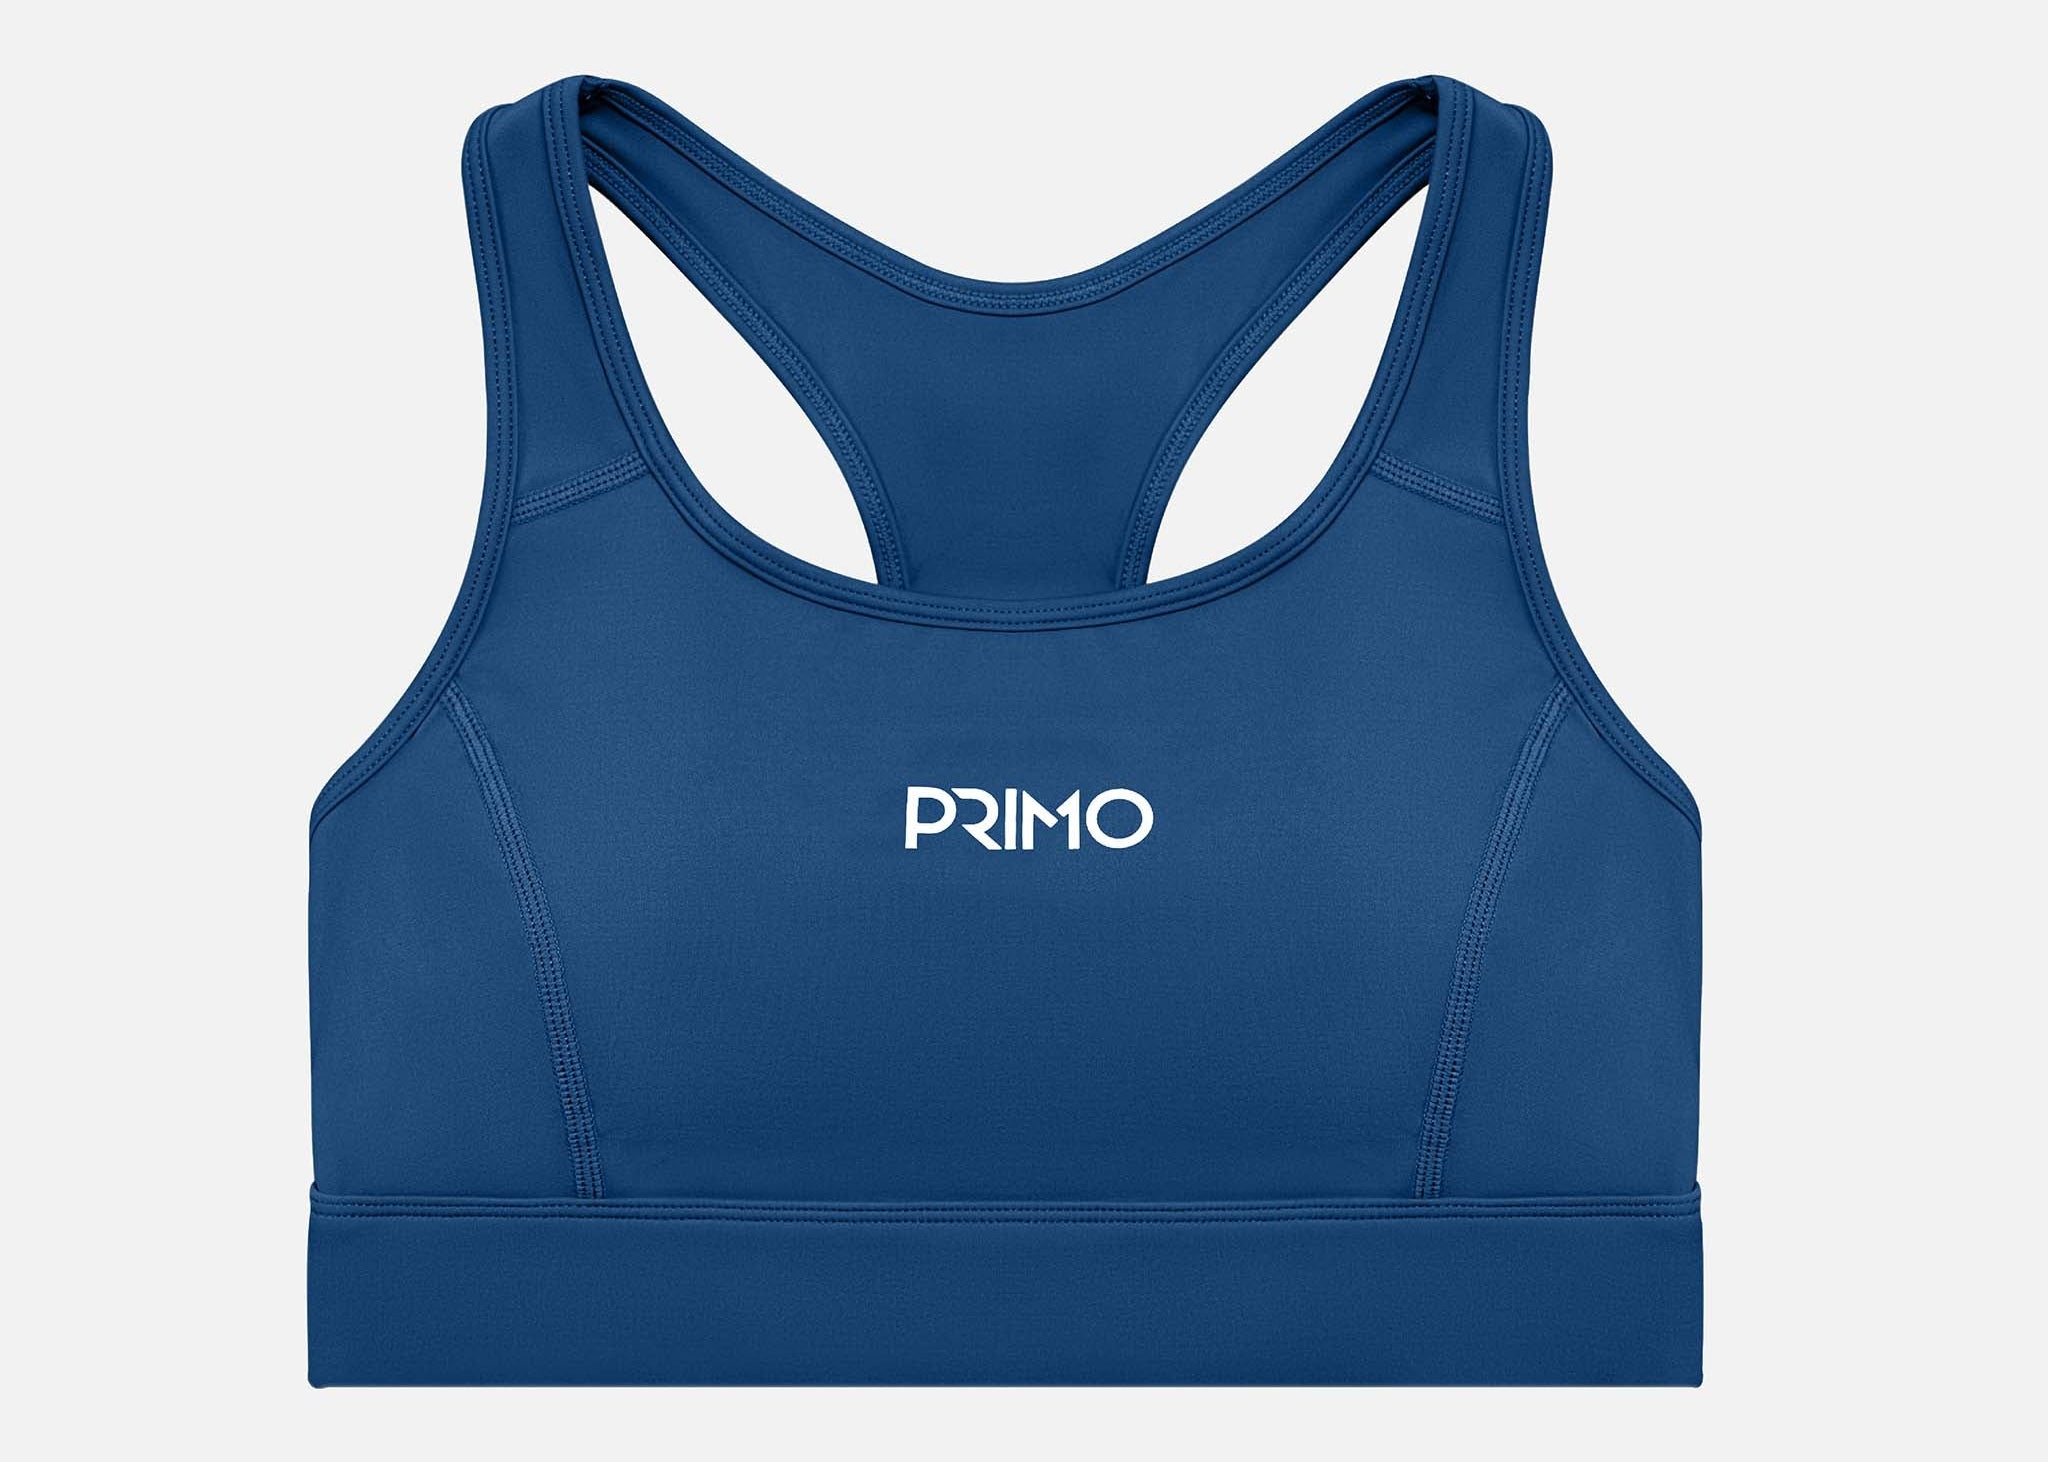 Primo Fight Wear Official Air Sports Bra - Navy